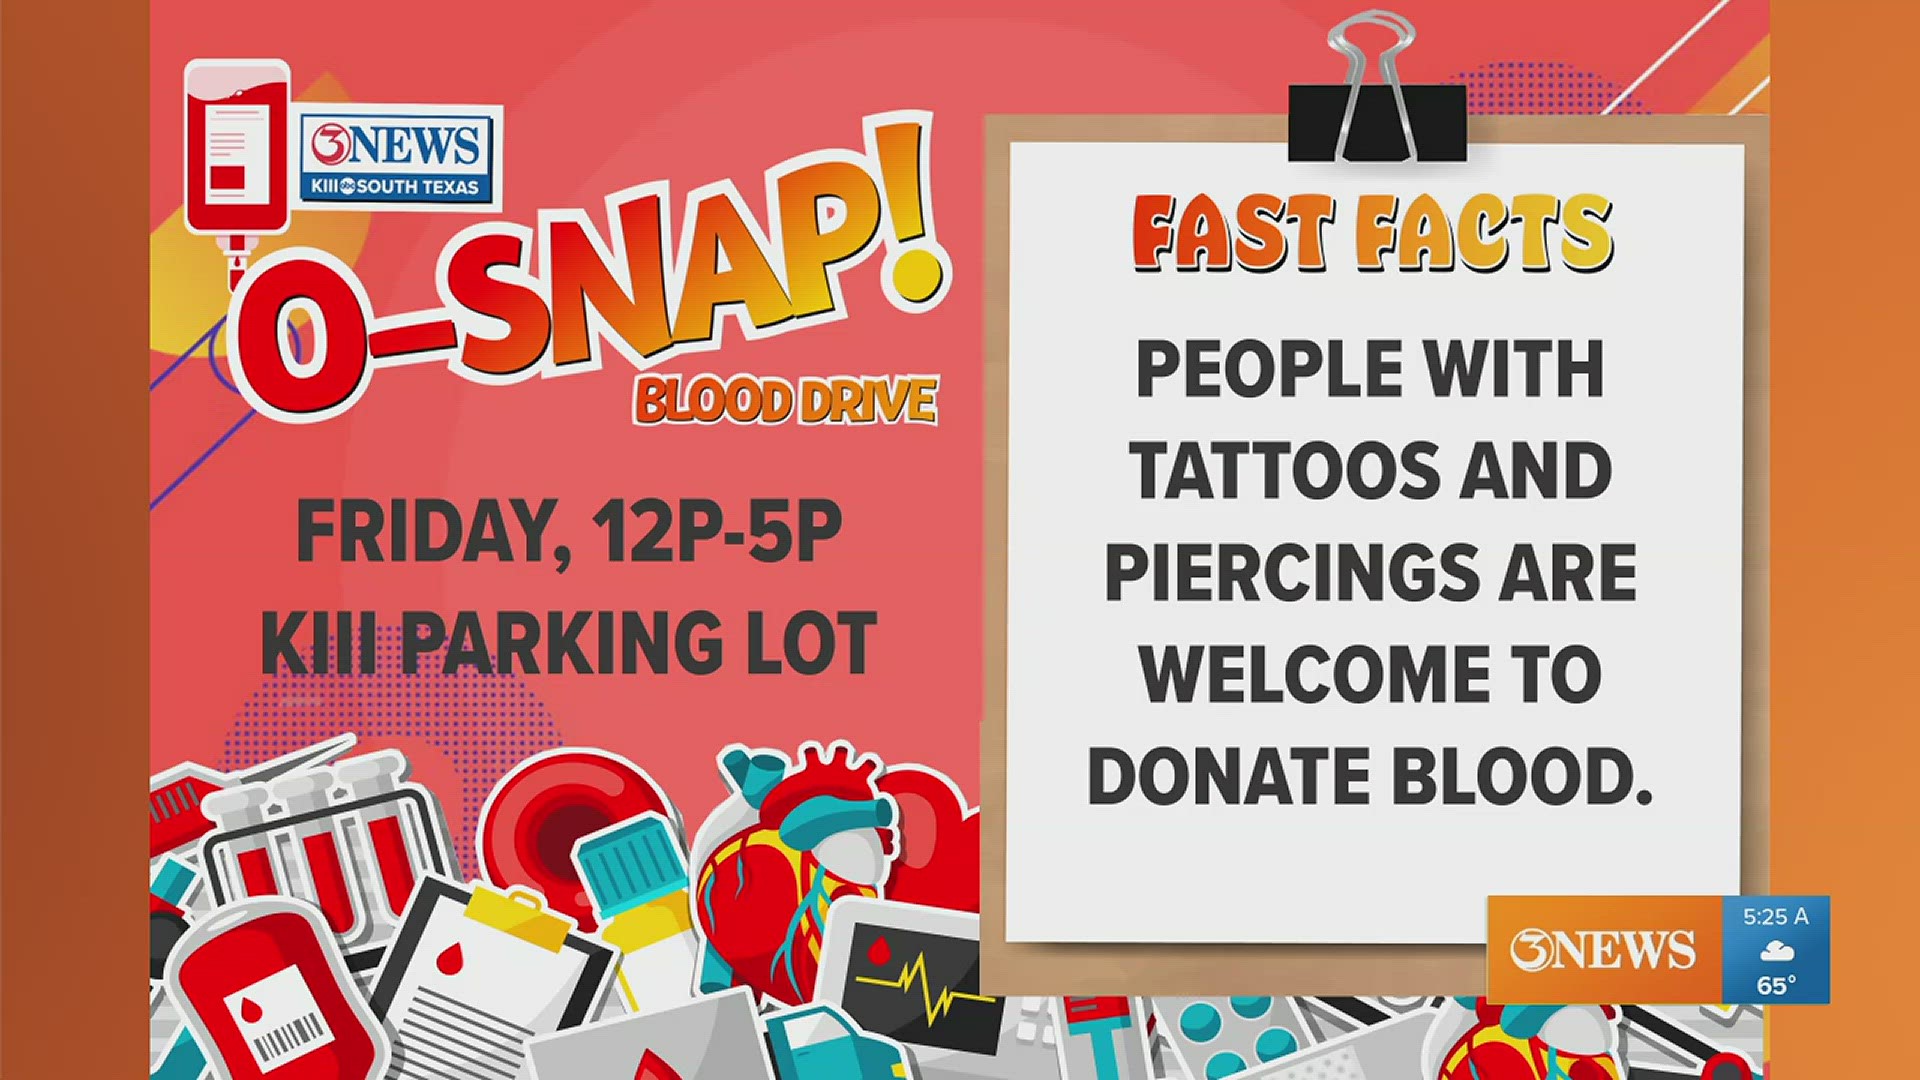 3NEWS will be hosting the O-Snap blood drive on Friday.